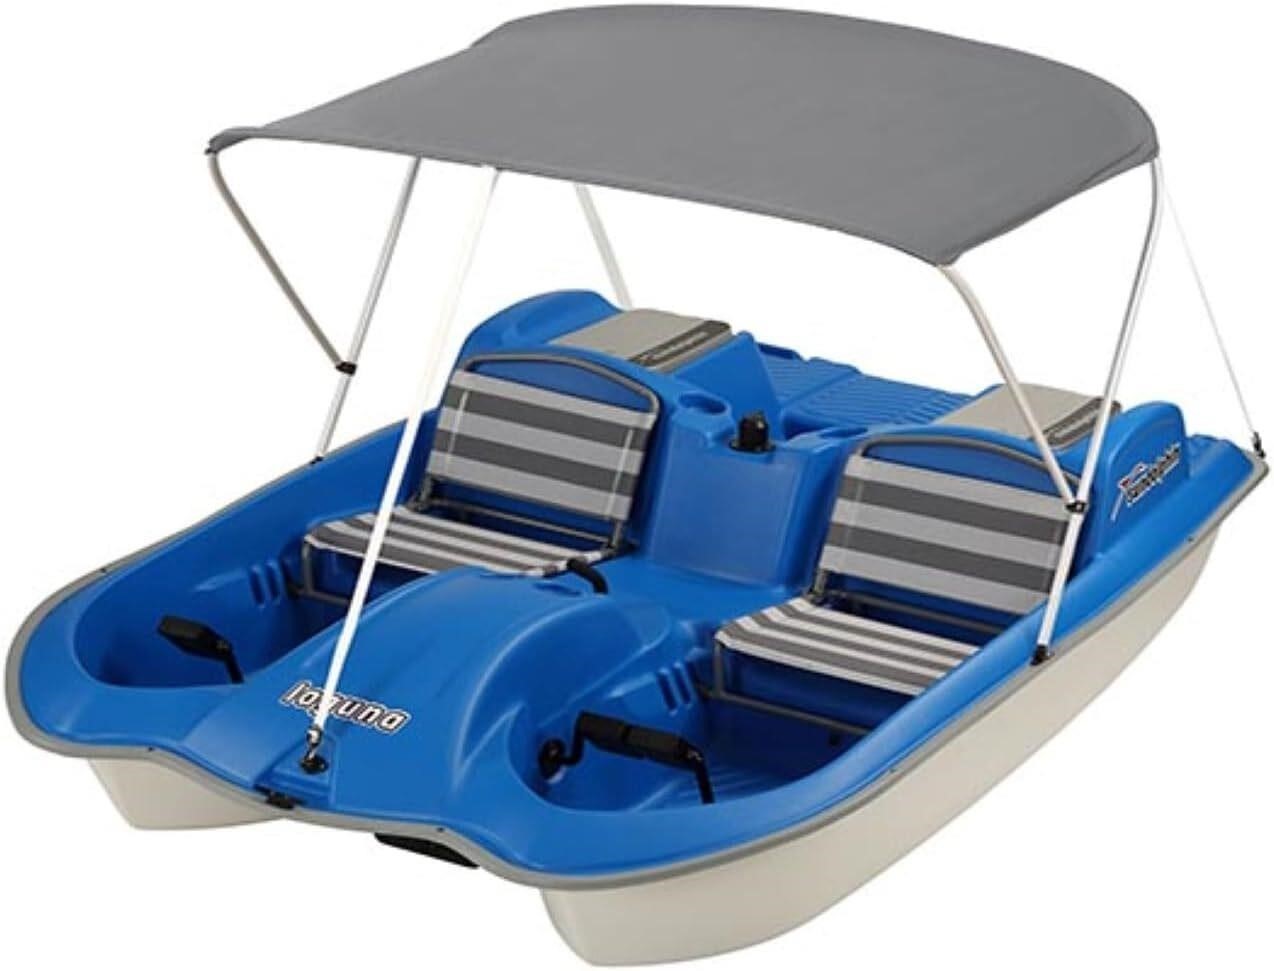 Laguna 5 Seat Pedal Boat with Canopy - Blue